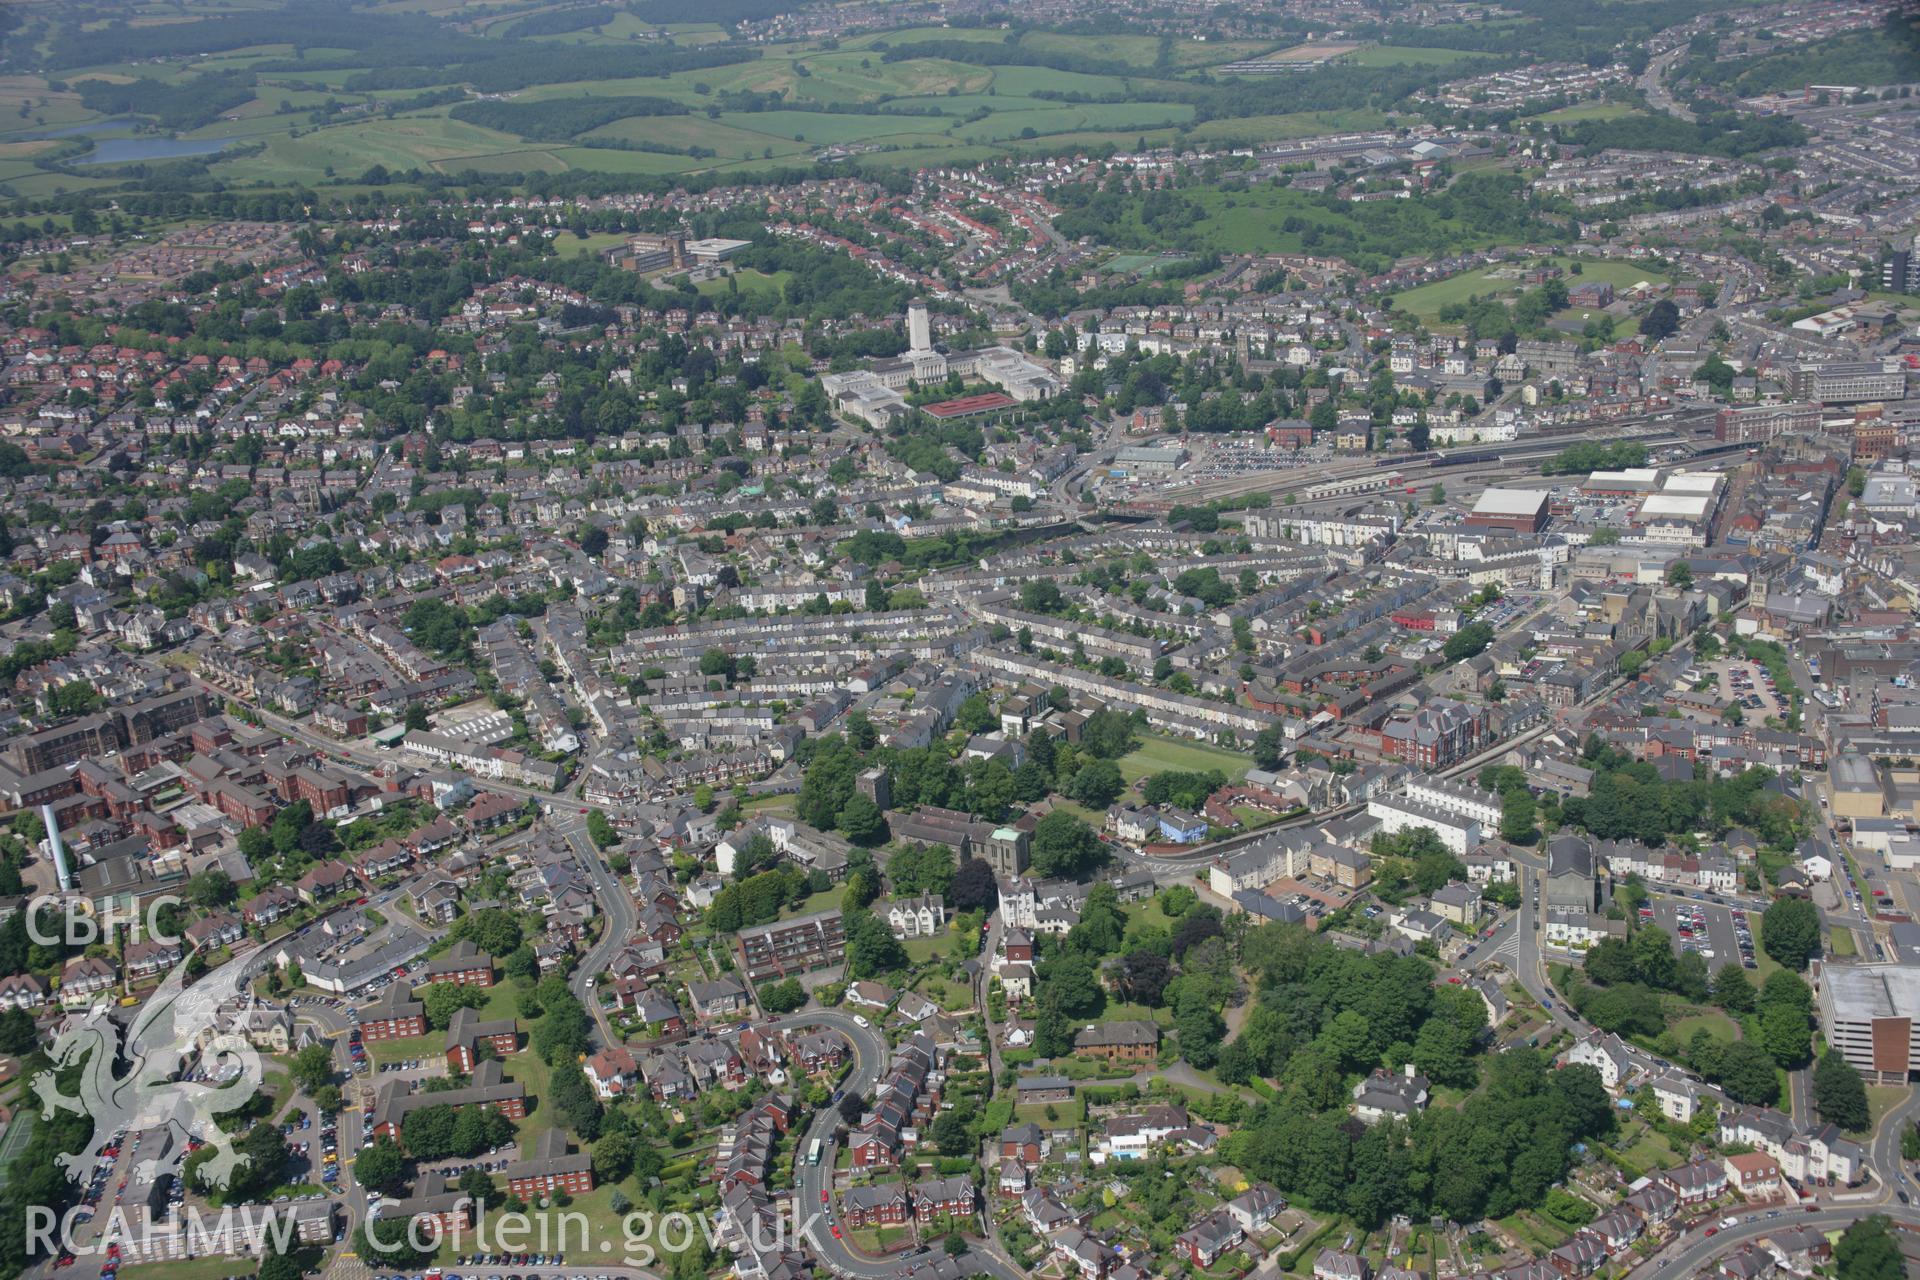 RCAHMW colour oblique photograph of Newport city. Taken by Toby Driver on 29/06/2006.